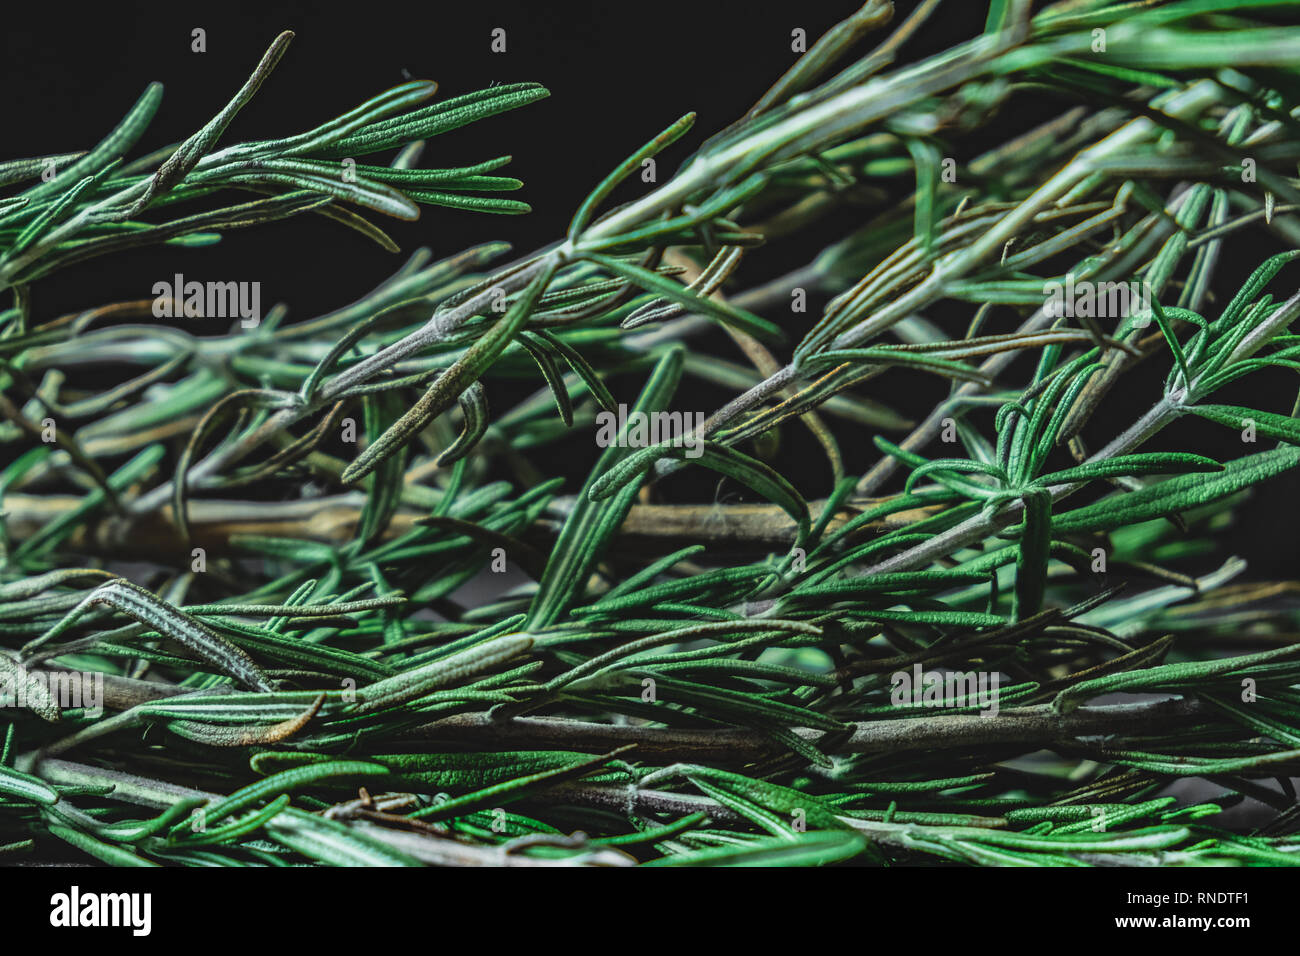 Leaves of rosemary plant in dark background. Close-up view of rosemary herb. Stock Photo